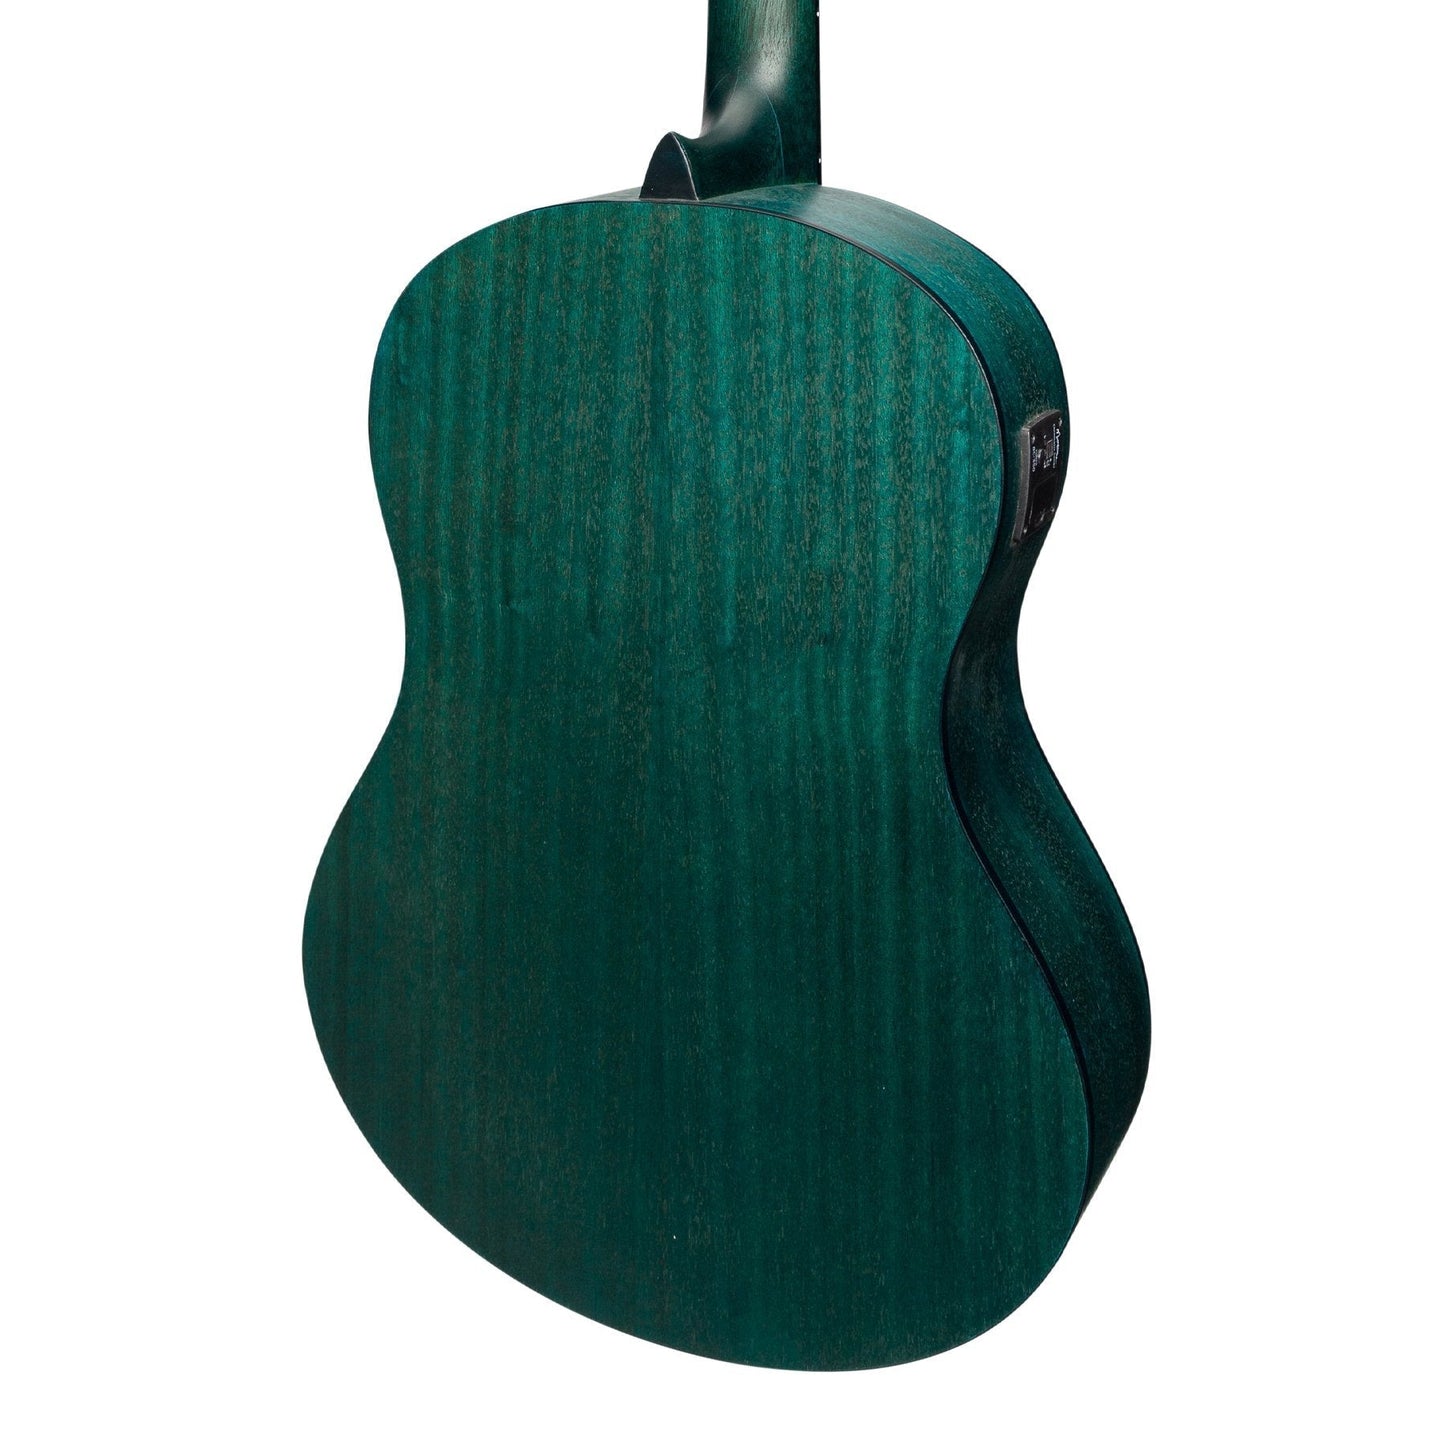 Martinez 'Slim Jim' Full Size Student Classical Guitar Pack with Built In Tuner (Teal Green)